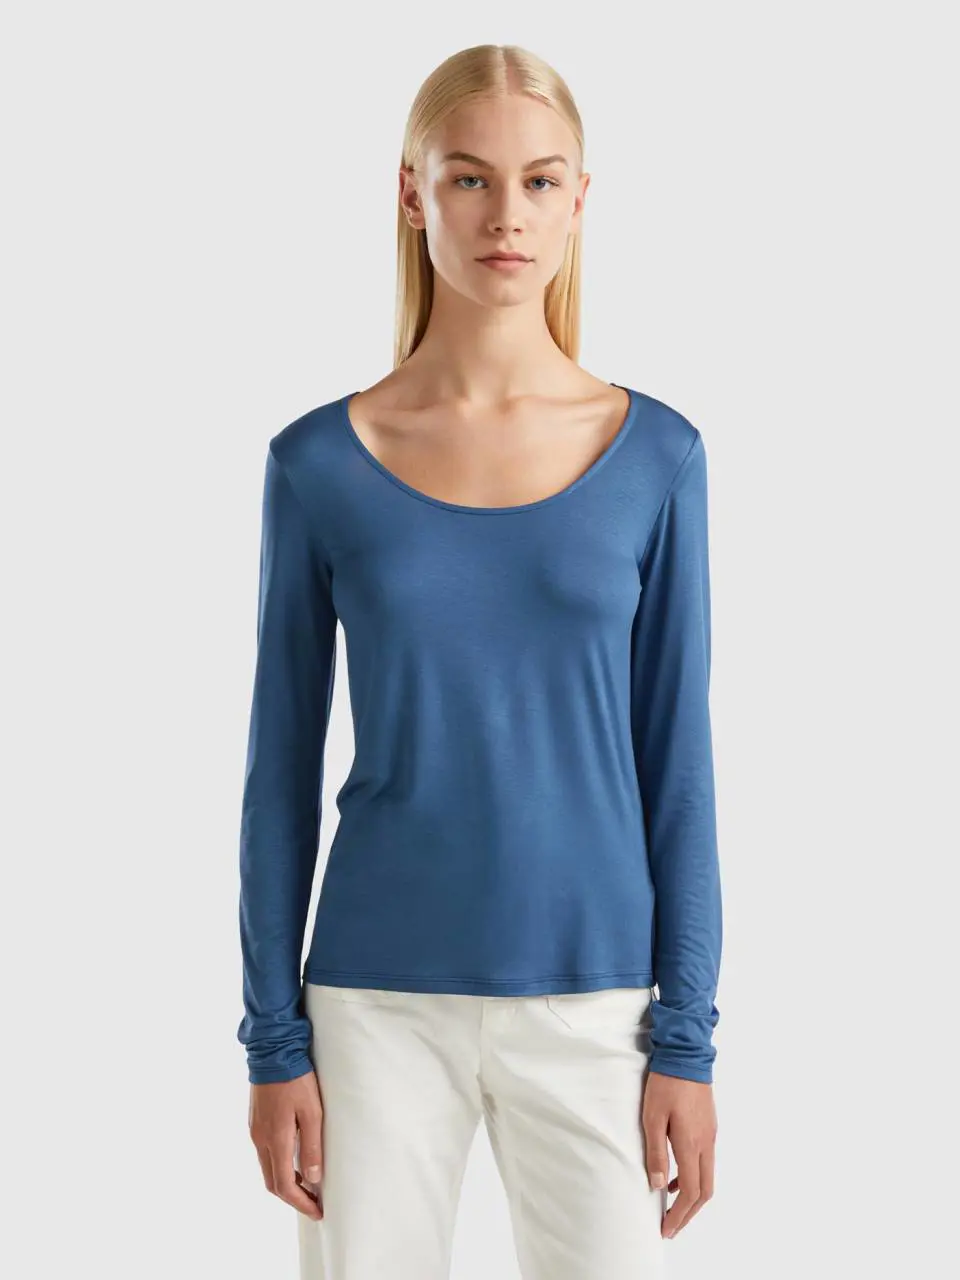 Benetton t-shirt in sustainable stretch viscose. 1